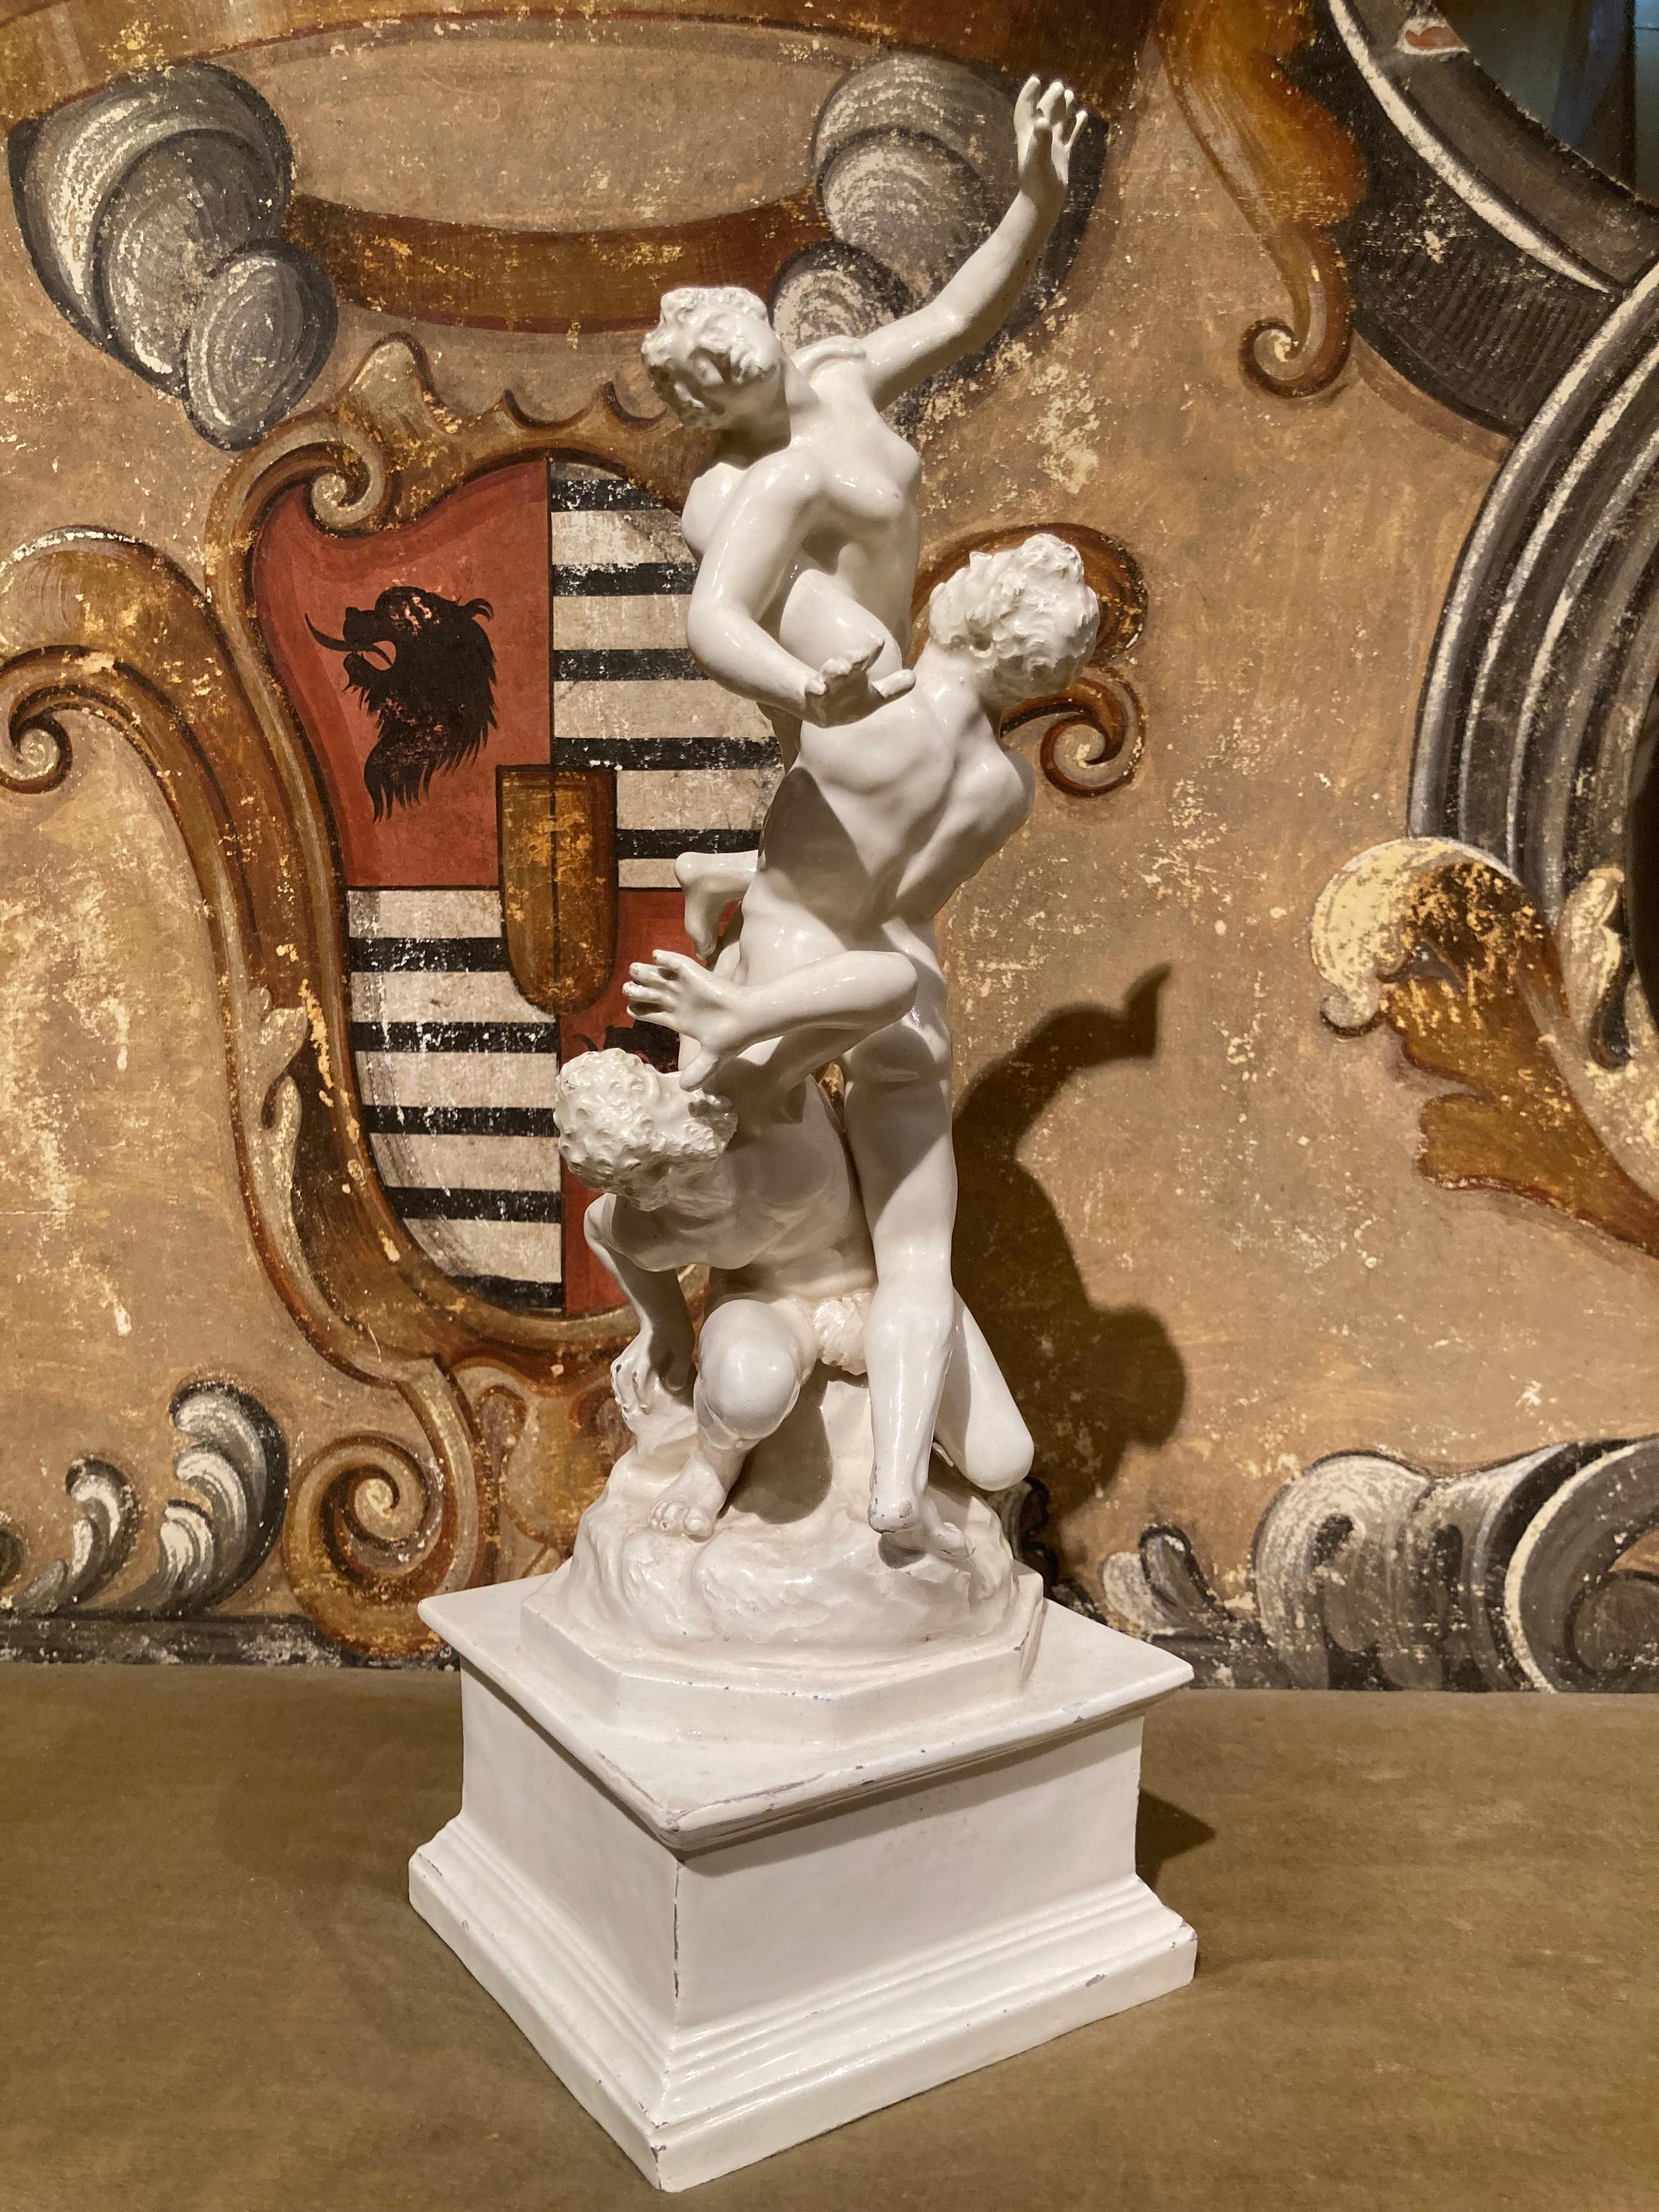 This compelling Italian 19th century white glazed porcelain sculpture depicts ‘The Rape of the Sabines’, after a monumental work by the Renaissance artist, Giambologna (1529-1608) that can still be viewed in the Loggia dei Lanzi, Piazza della